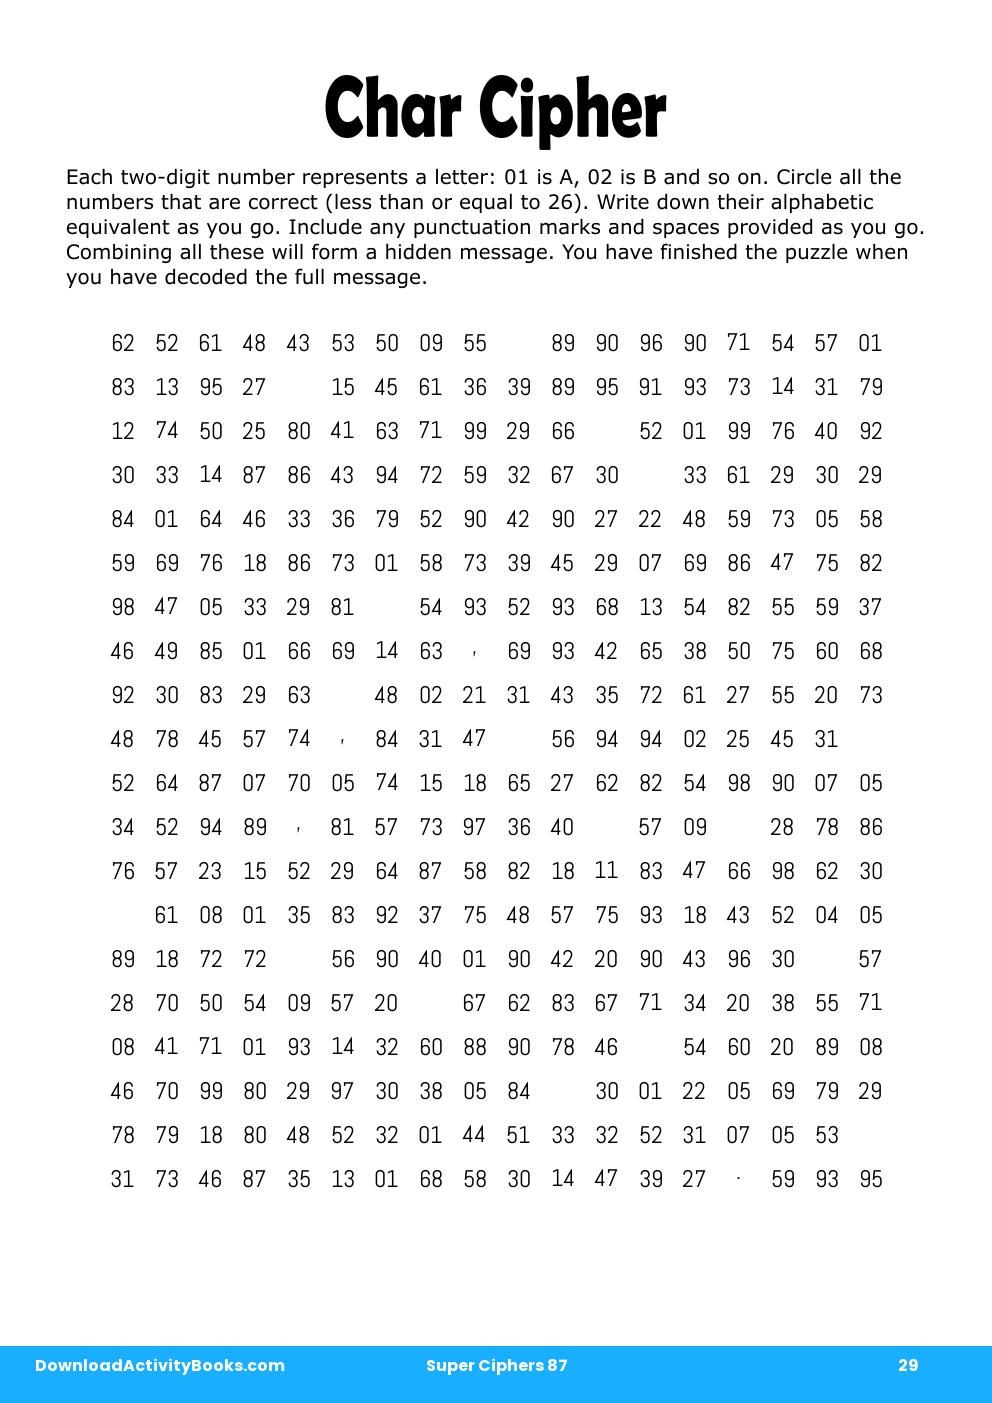 Char Cipher in Super Ciphers 87